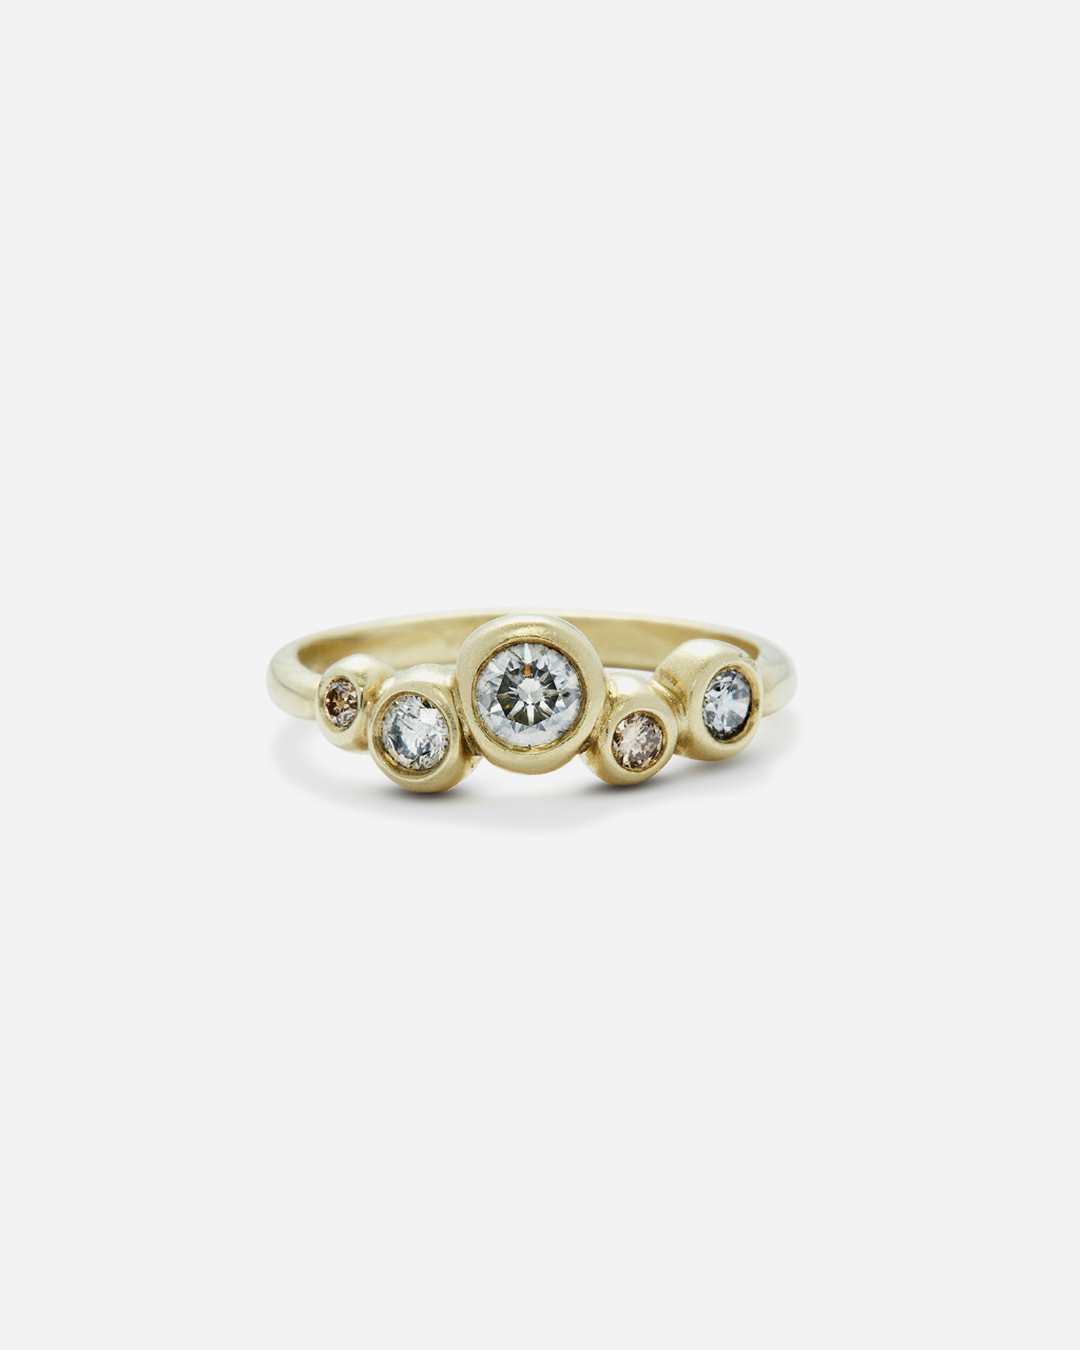 Bubble 1 / Grey and Cognac Diamond Ring By Hiroyo